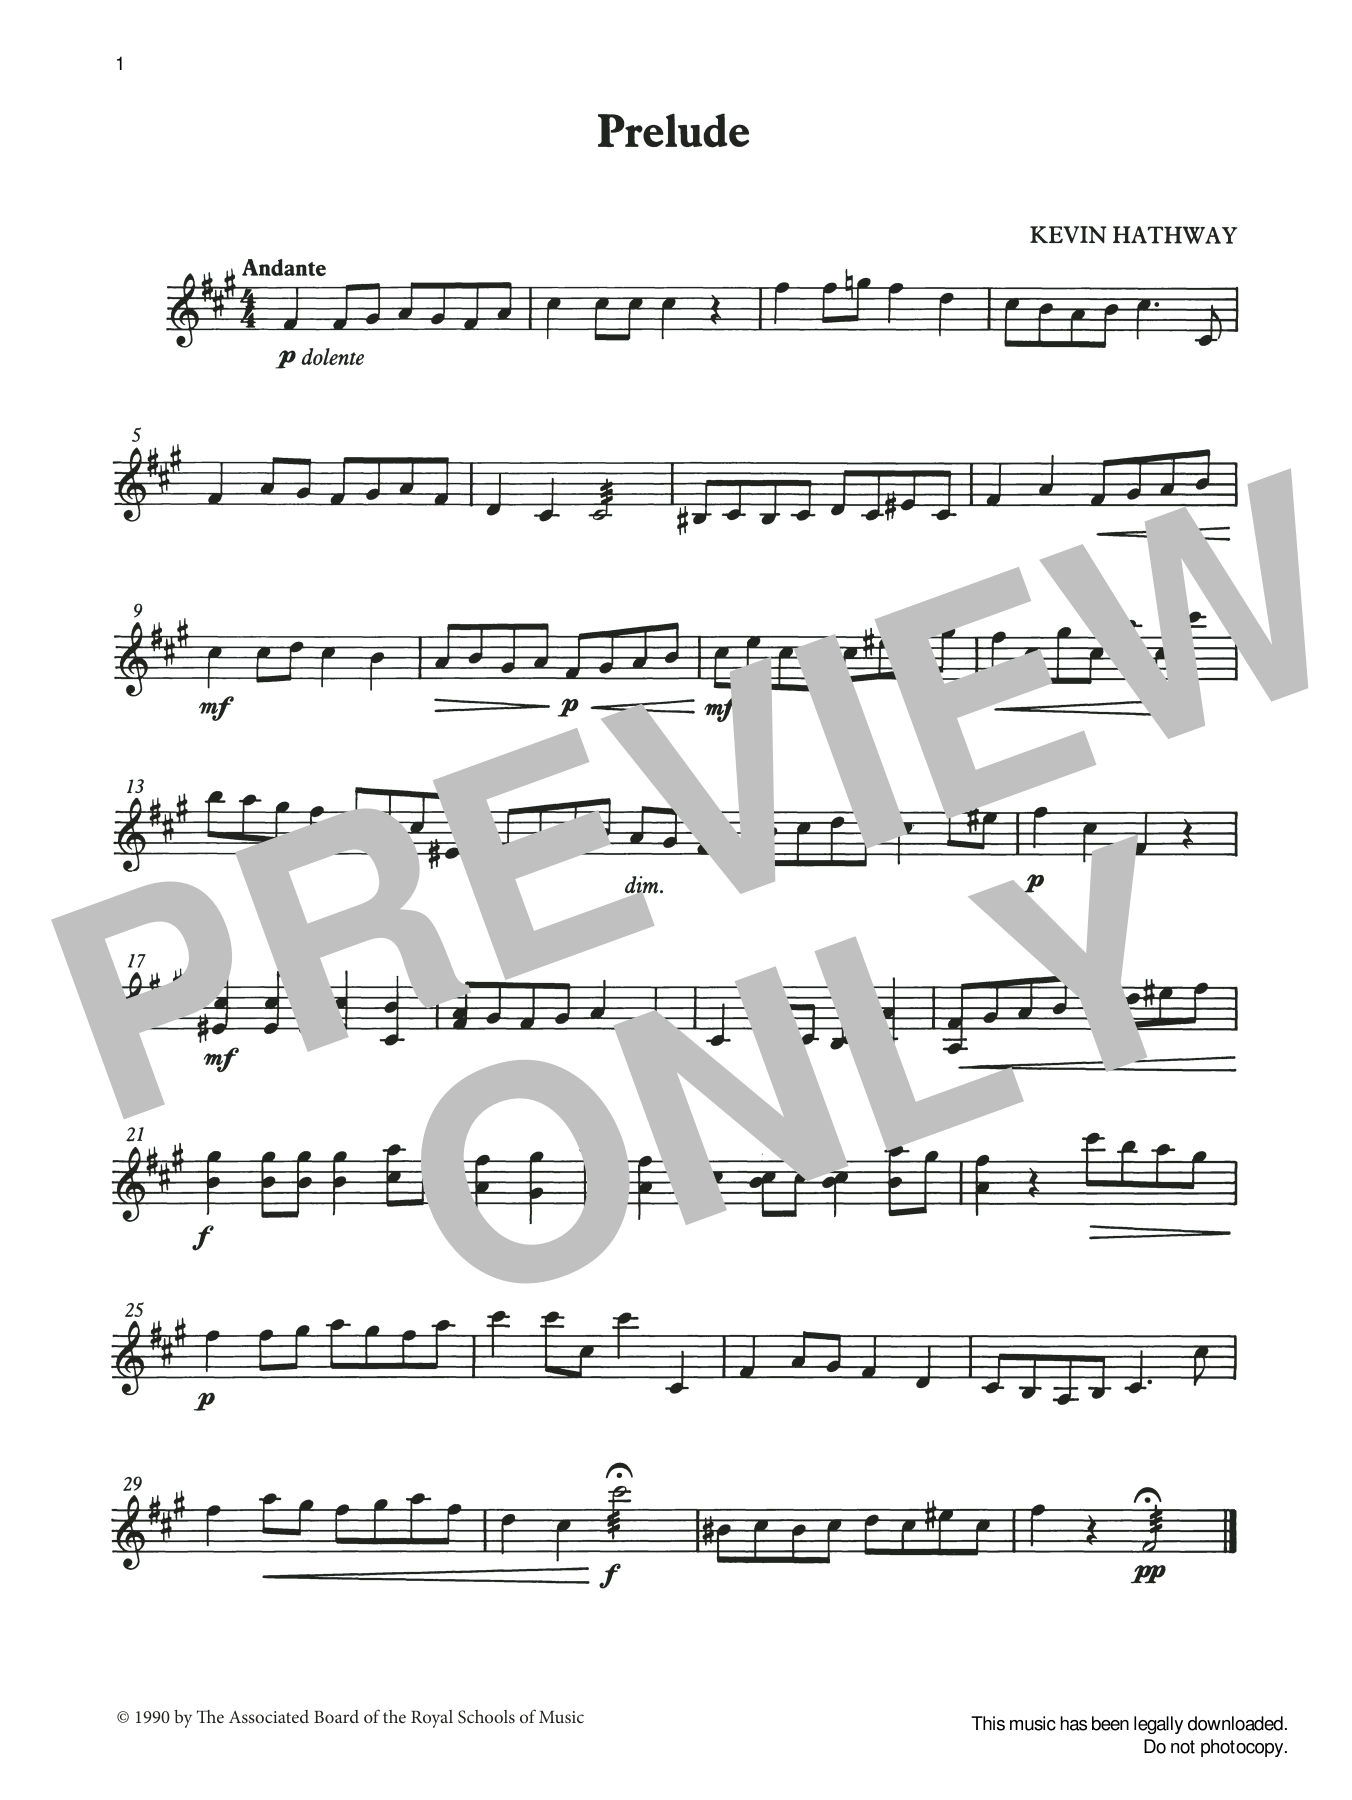 Download Ian Wright and Kevin Hathaway Prelude from Graded Music for Tuned Per Sheet Music